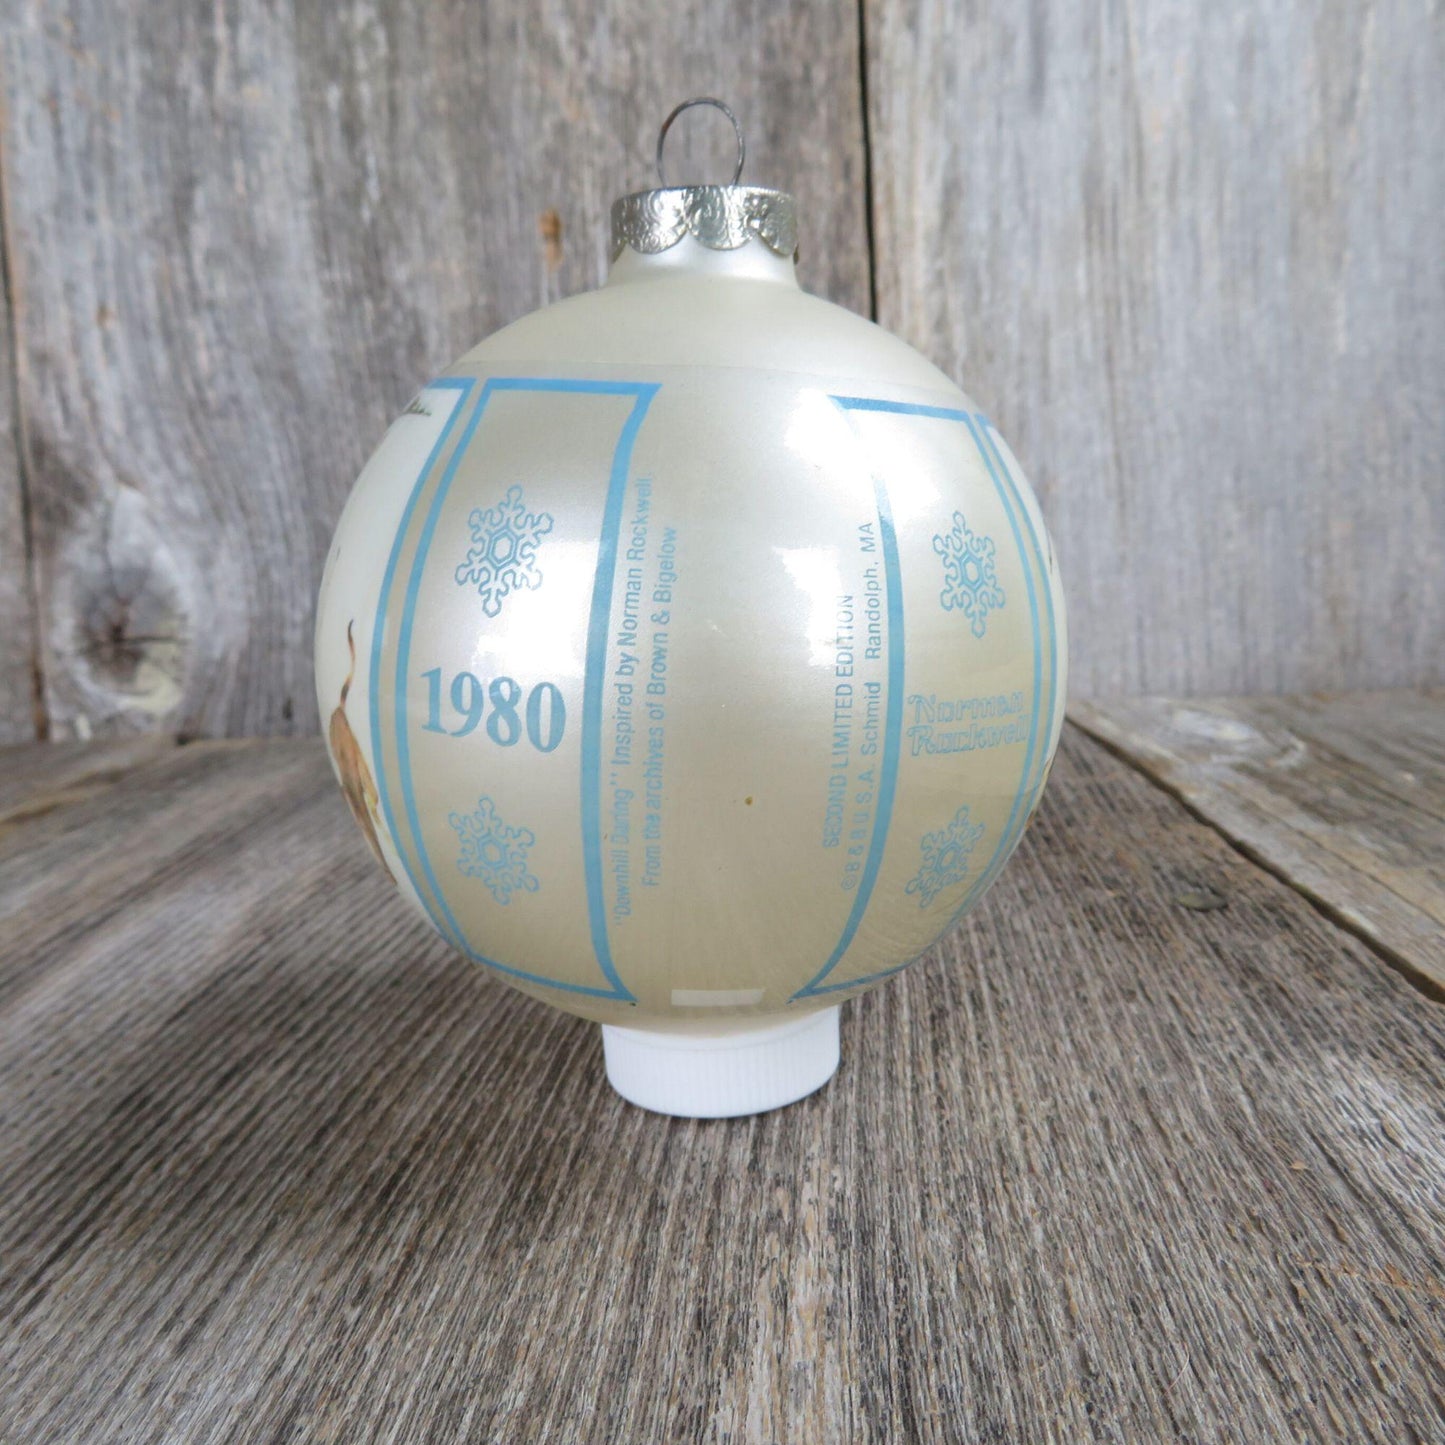 Vintage Norman Rockwell Ball Ornament Downhill Daring Schmid Christmas 1980 Blue White Silver